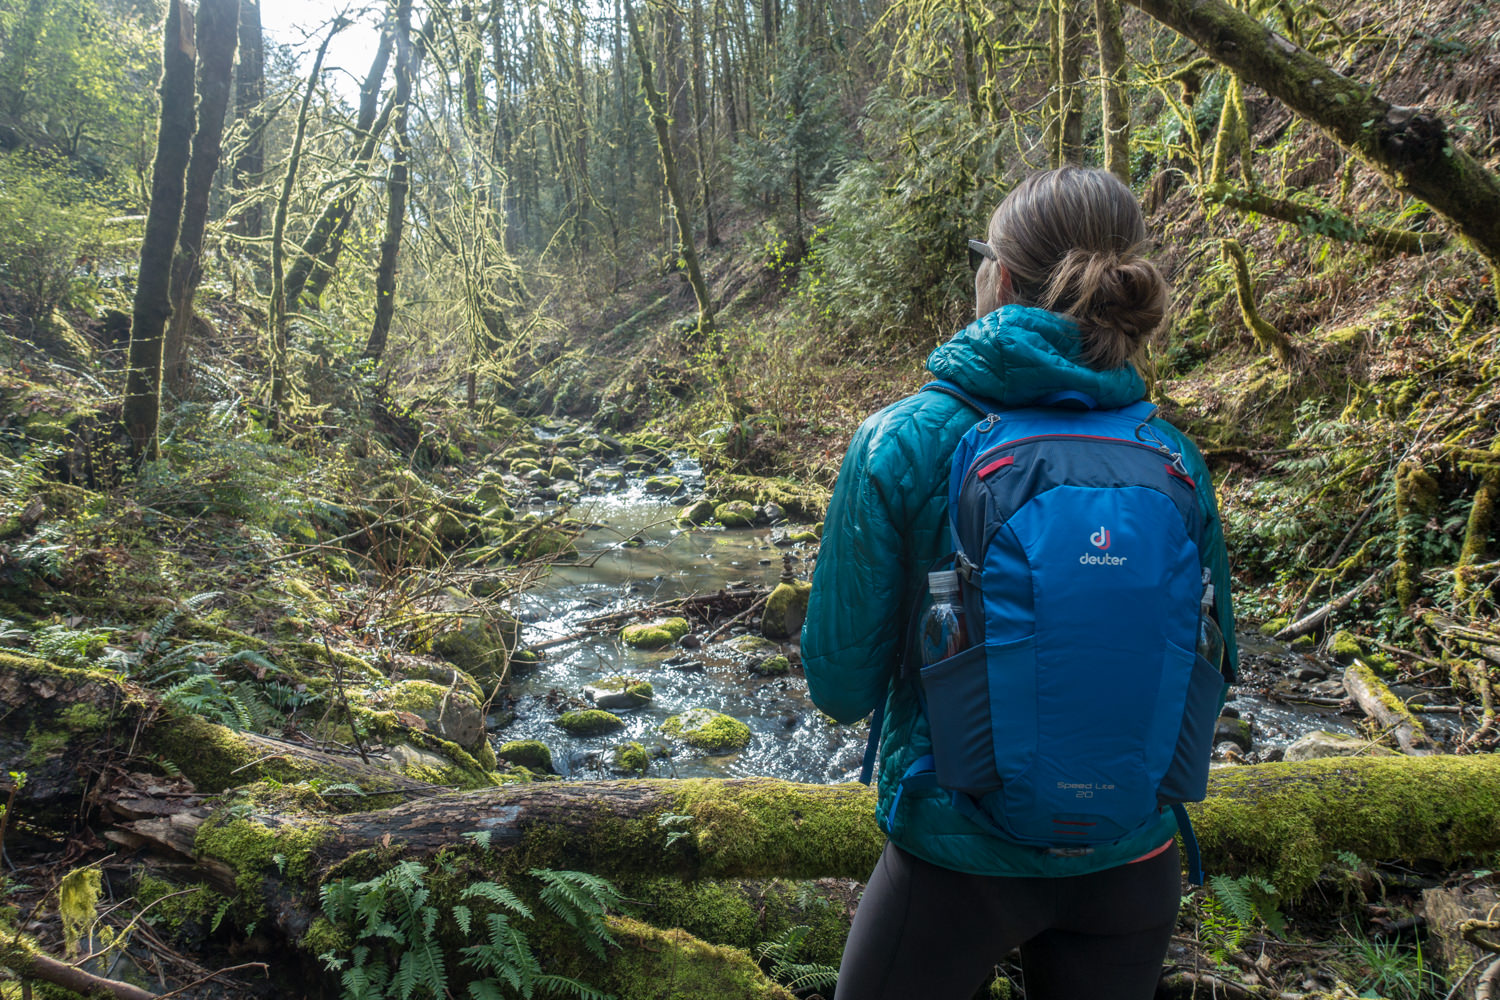 A hiker wearing a Deuter Speedlite Daypack looking at a mossy forest scene with a stream running through it